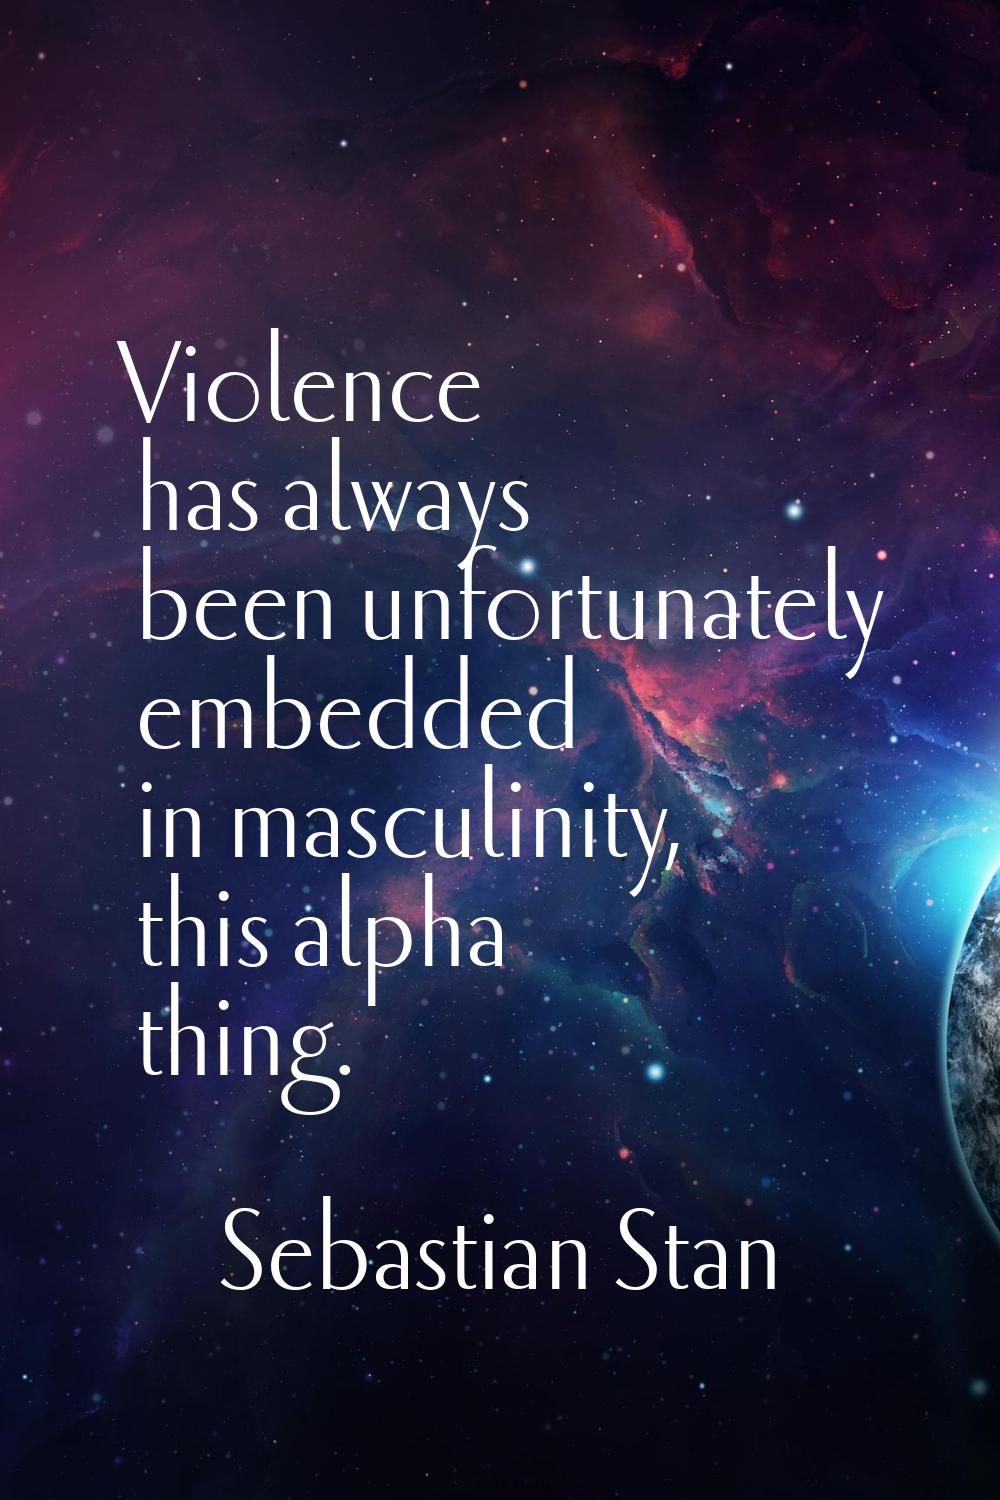 Violence has always been unfortunately embedded in masculinity, this alpha thing.